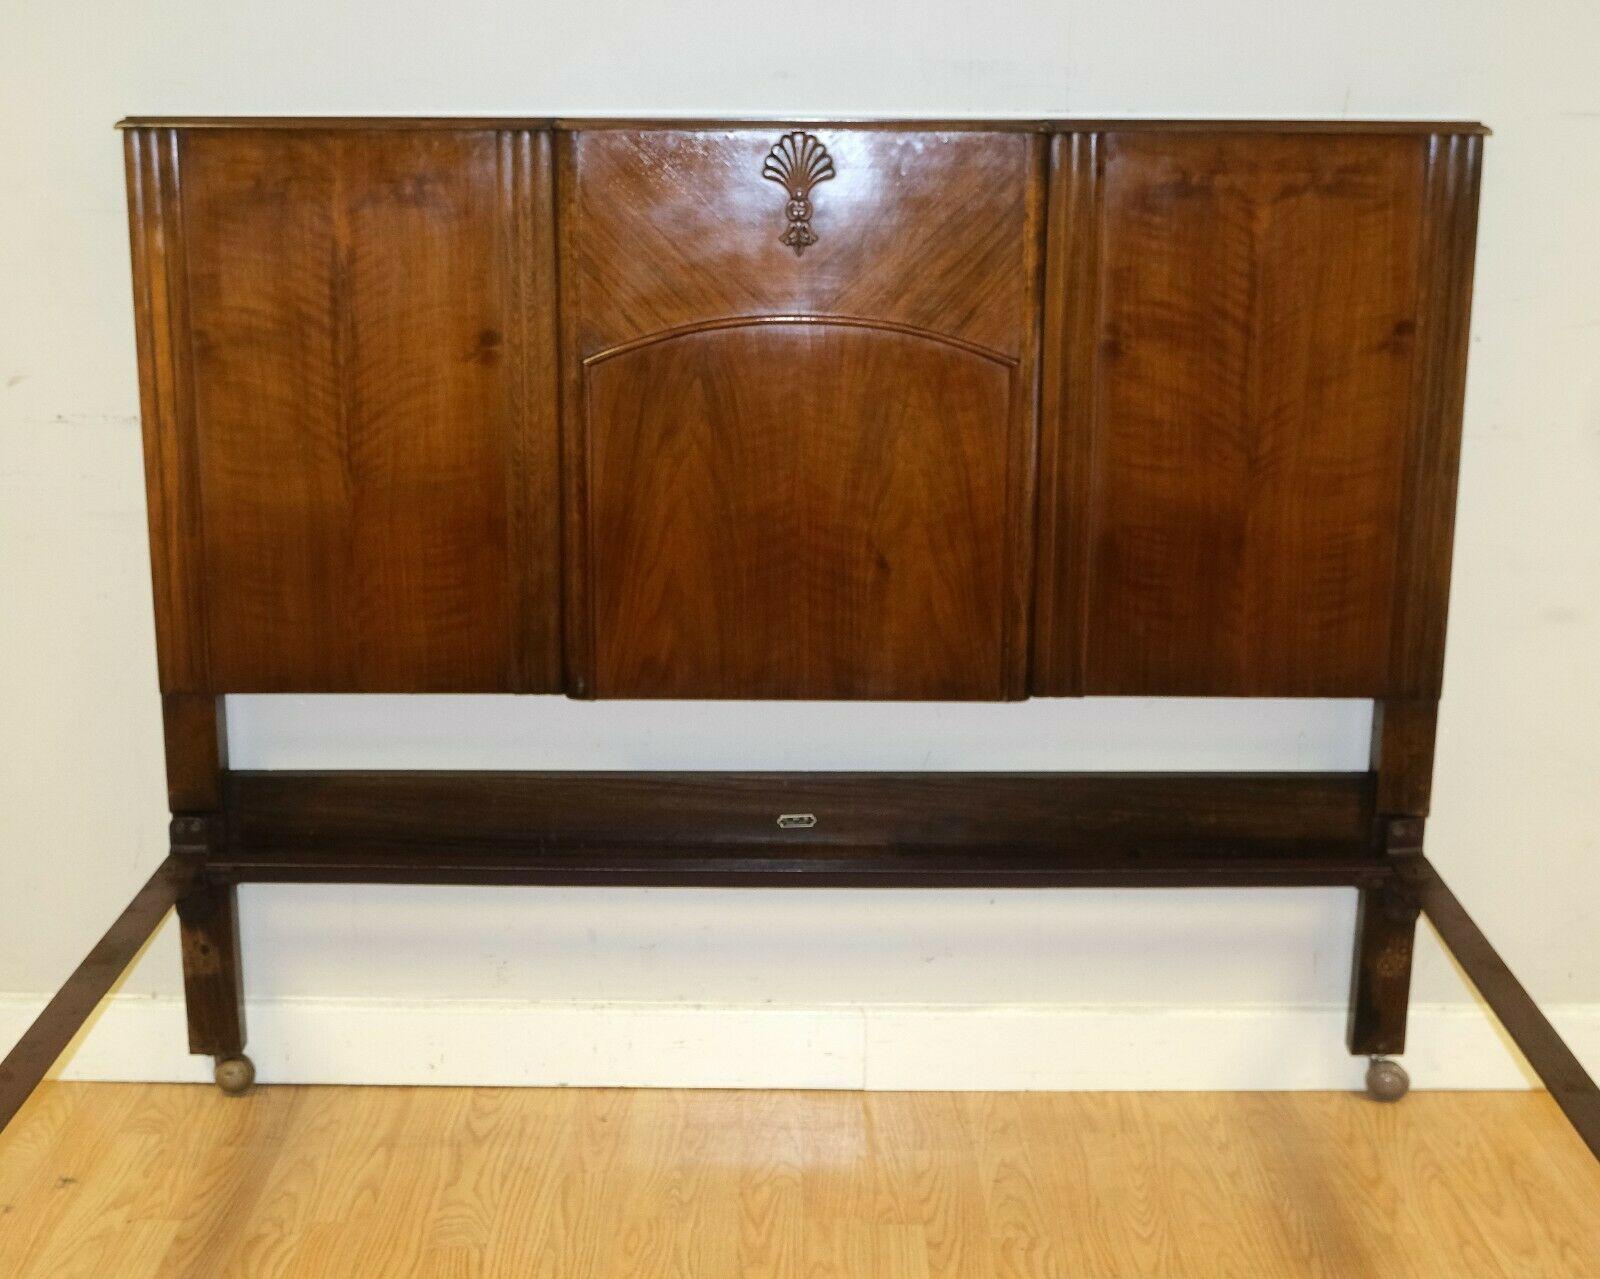 Elegant C.W.S Art Deco Walnut Brown Double Frame Bed on Wheels Part of a Set For Sale 3